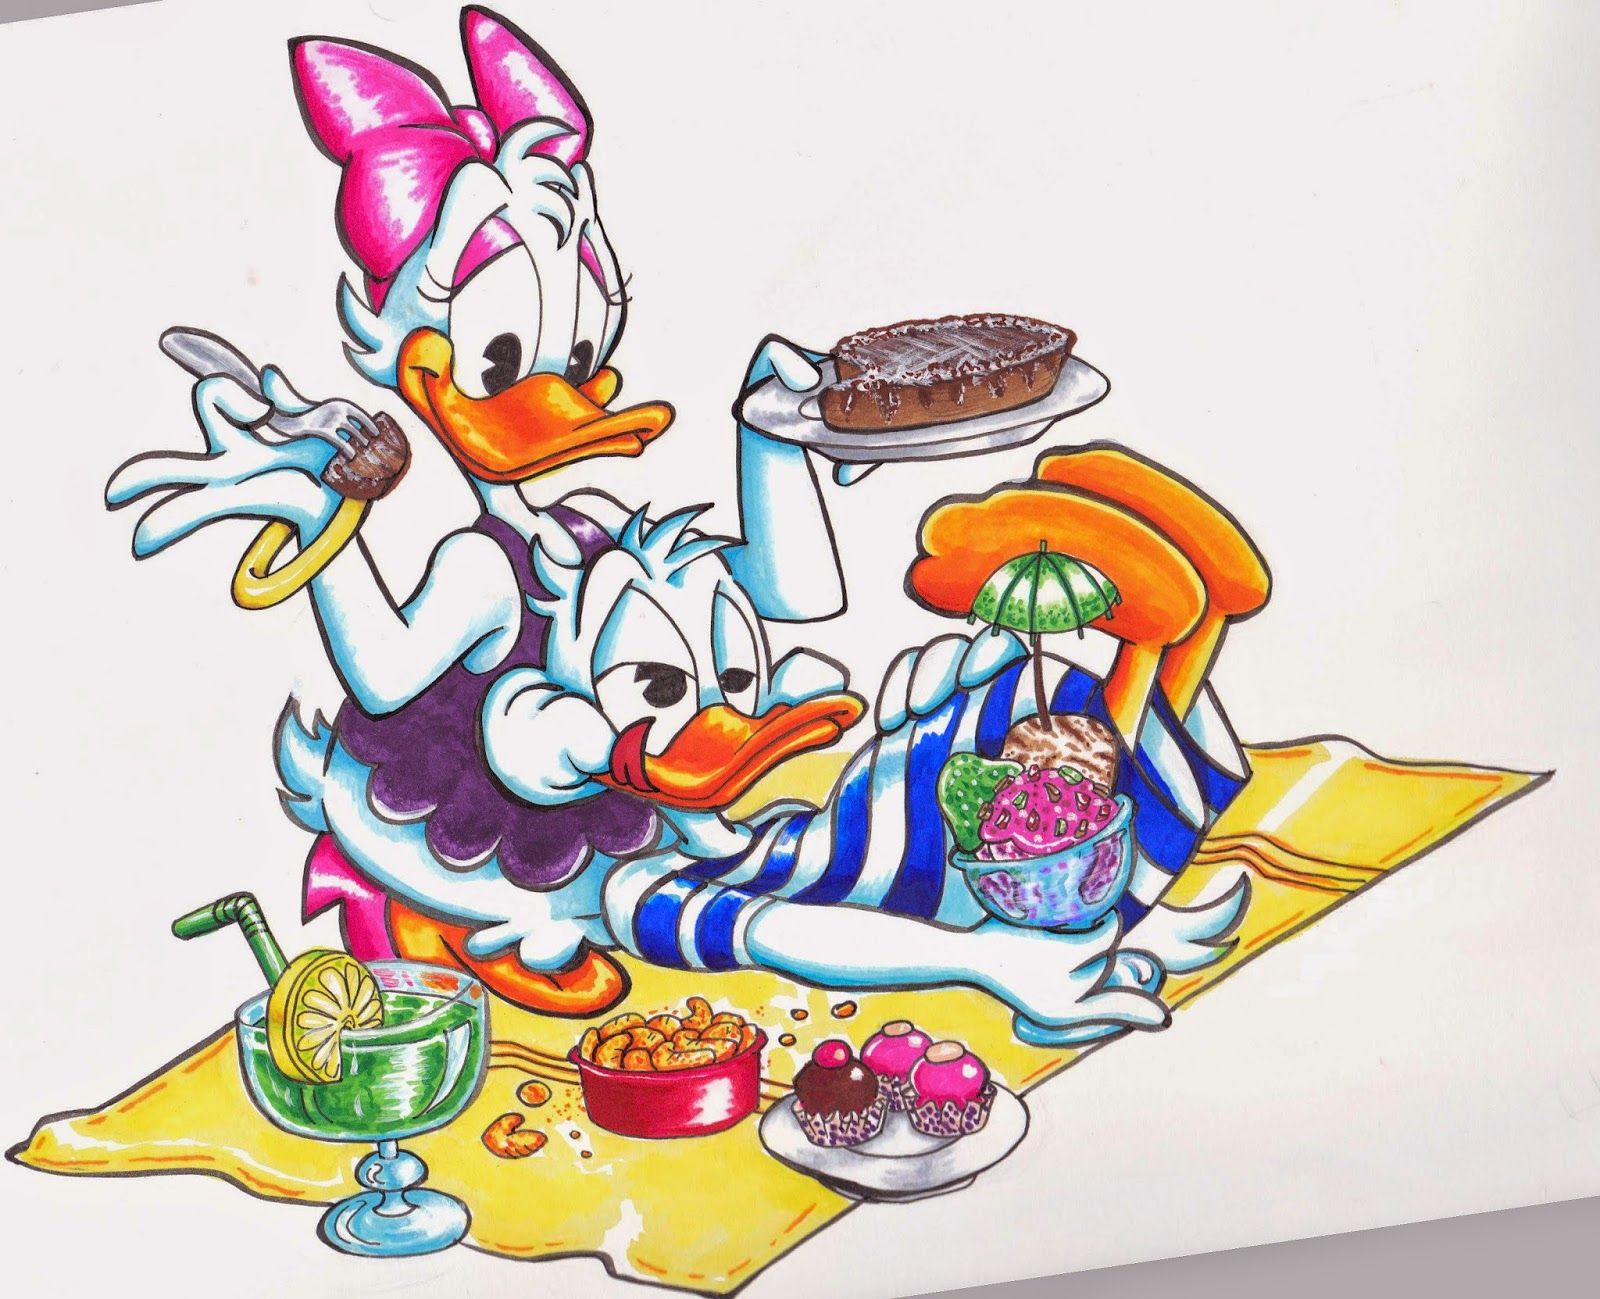 Daisy and Donald having a picnic - Duck